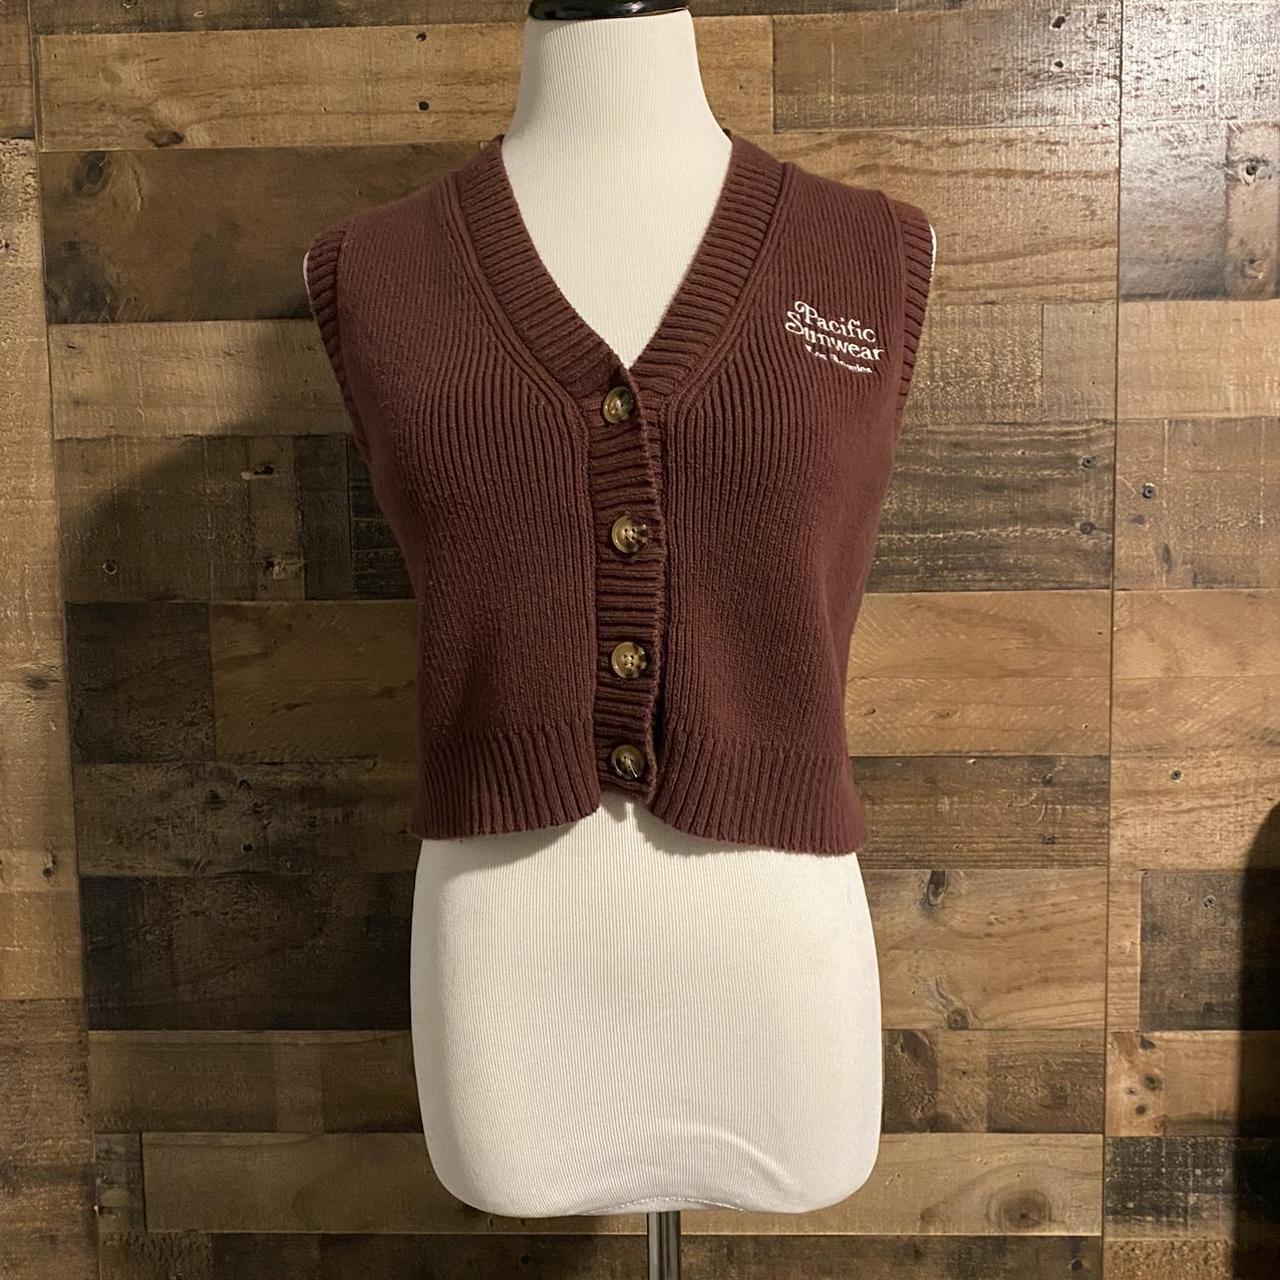 PacSun Women's Brown and White Gilet